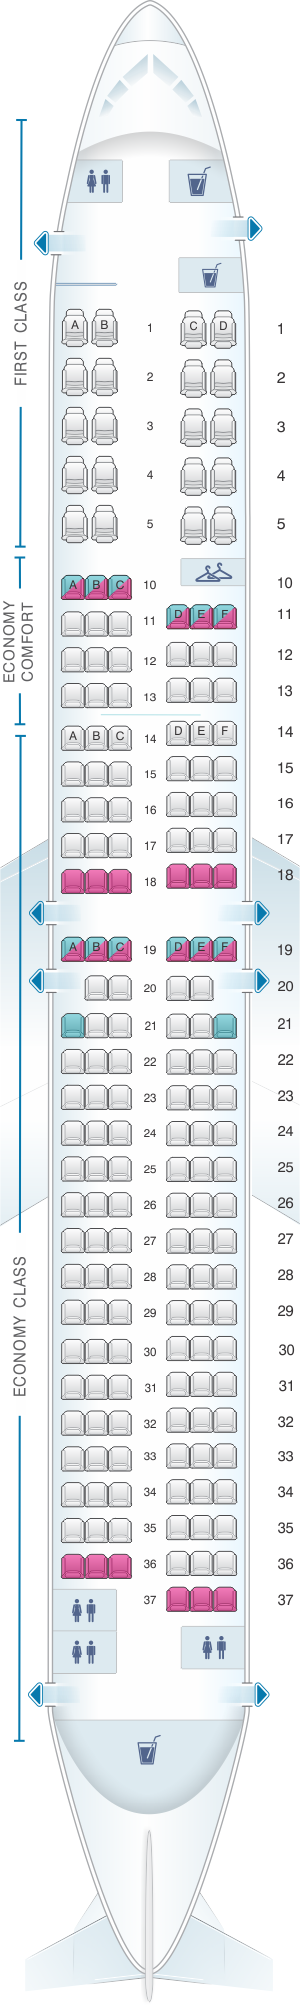 Boeing 737 800 Seating Chart Delta Two Birds Home